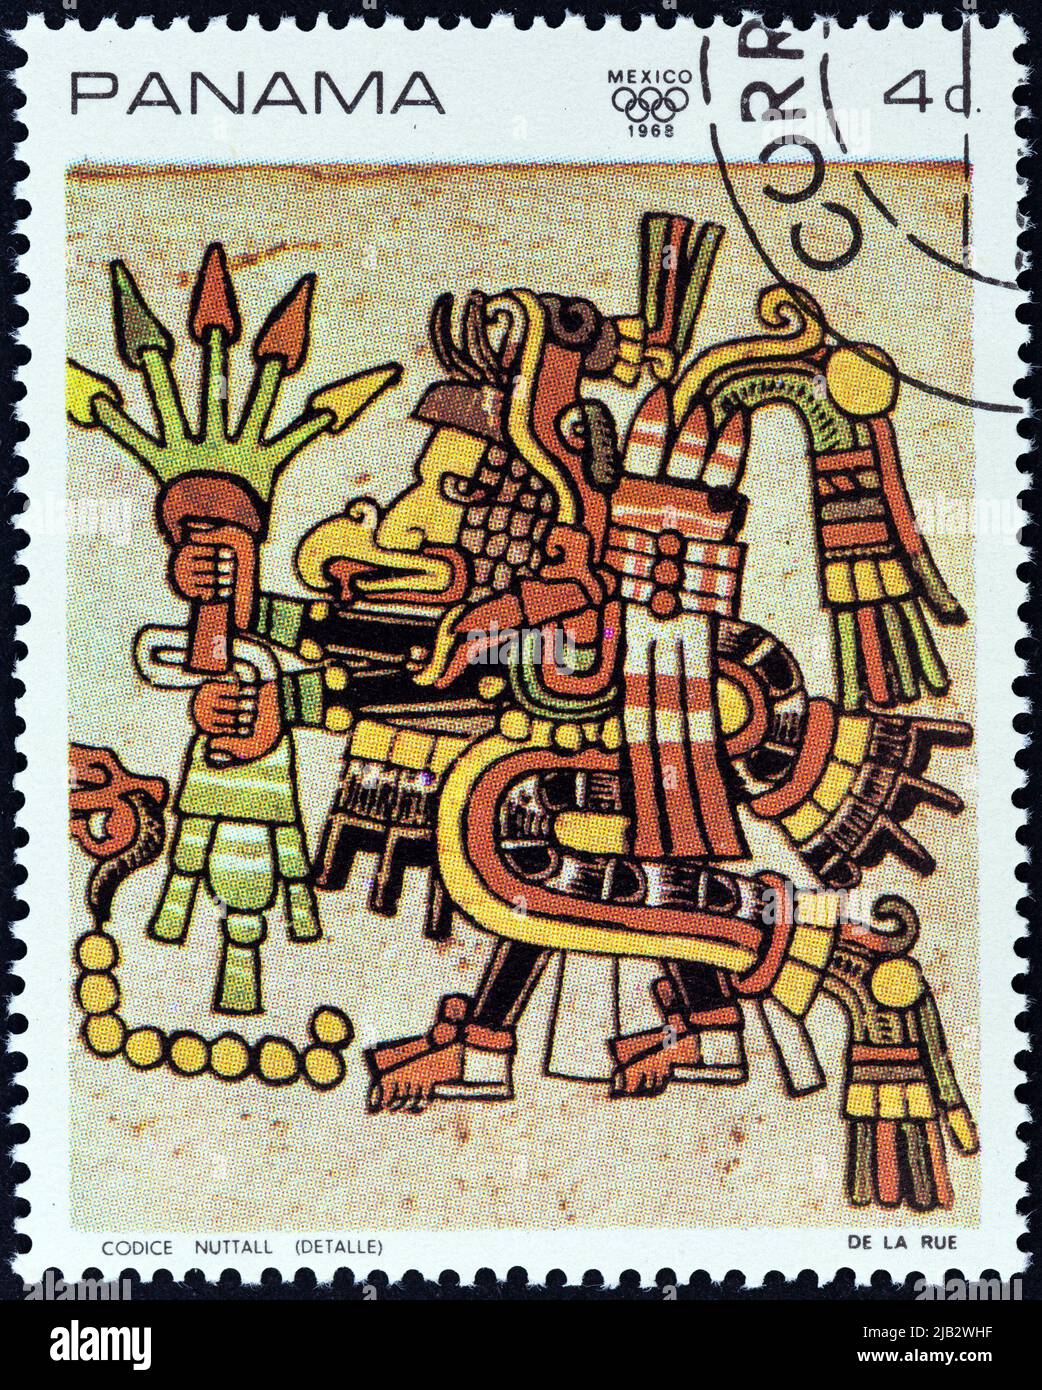 PANAMA - CIRCA 1968: A stamp printed in Panama from the '1968 Summer Olympics, Mexico City' issue shows Detail from the 'Codex Nutall', circa 1968. Stock Photo